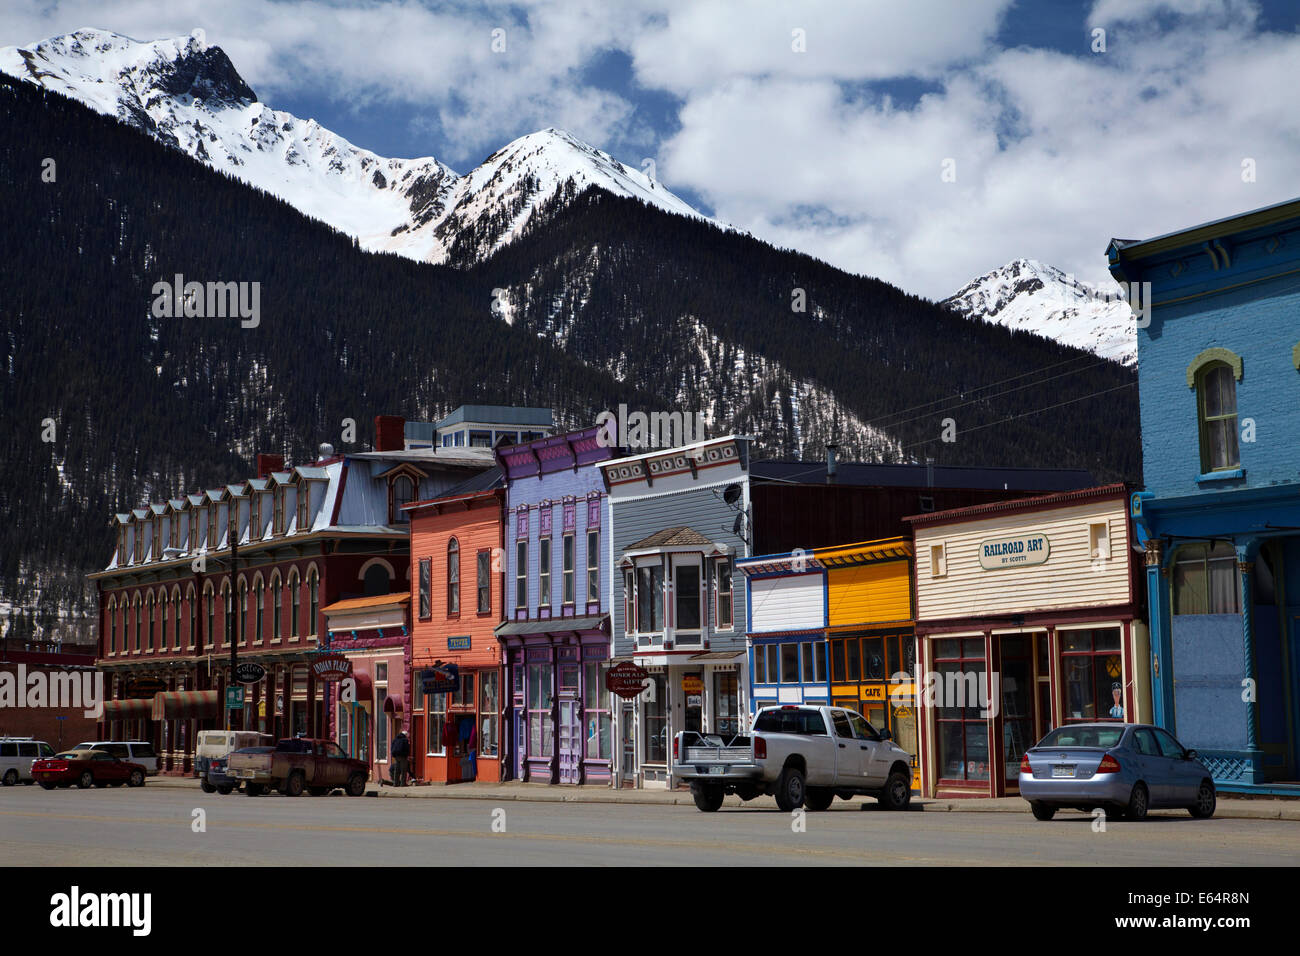 The historic mining town of Silverton, at an altitude of 9,305 ft / 2,836 m, in the San Juan Mountains, Colorado, USA Stock Photo